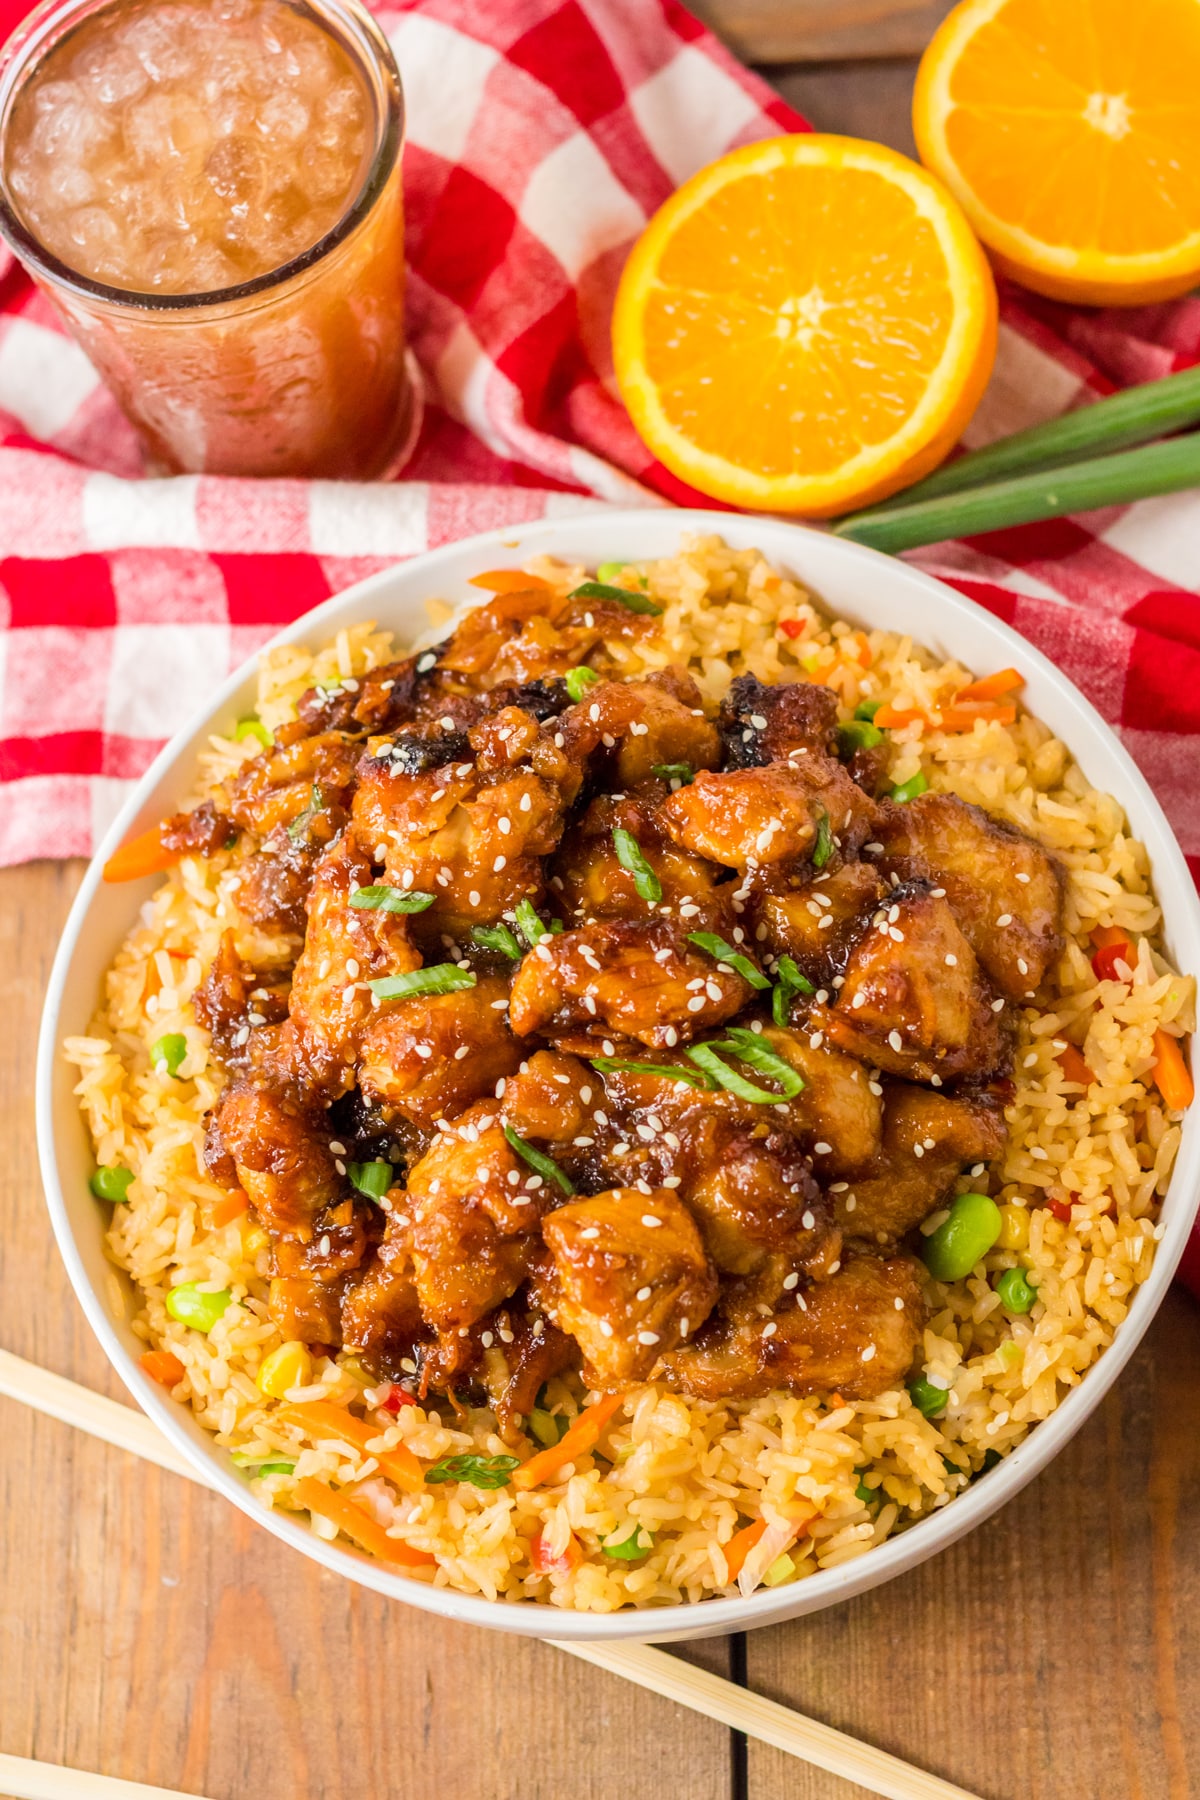 Top view of Slow Cooker Orange Chicken with chopsticks, juice and oranges on a wooden table